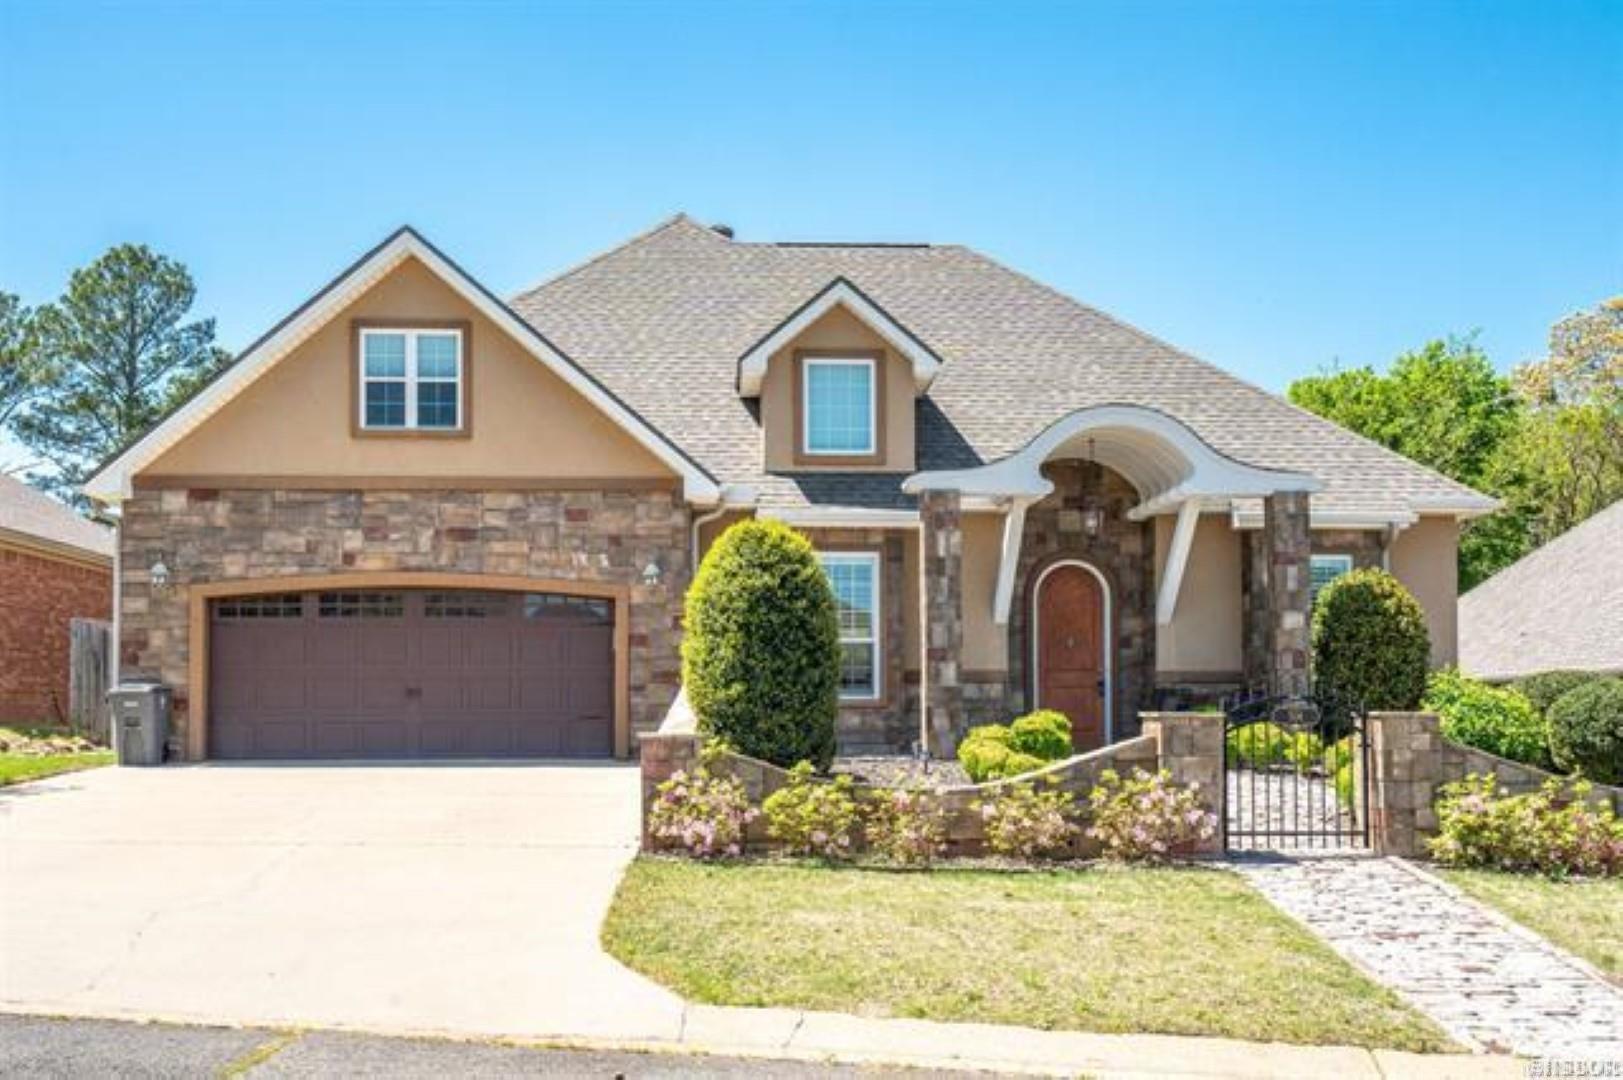 506 Willowbend Circle, Hot Springs, AR 71913